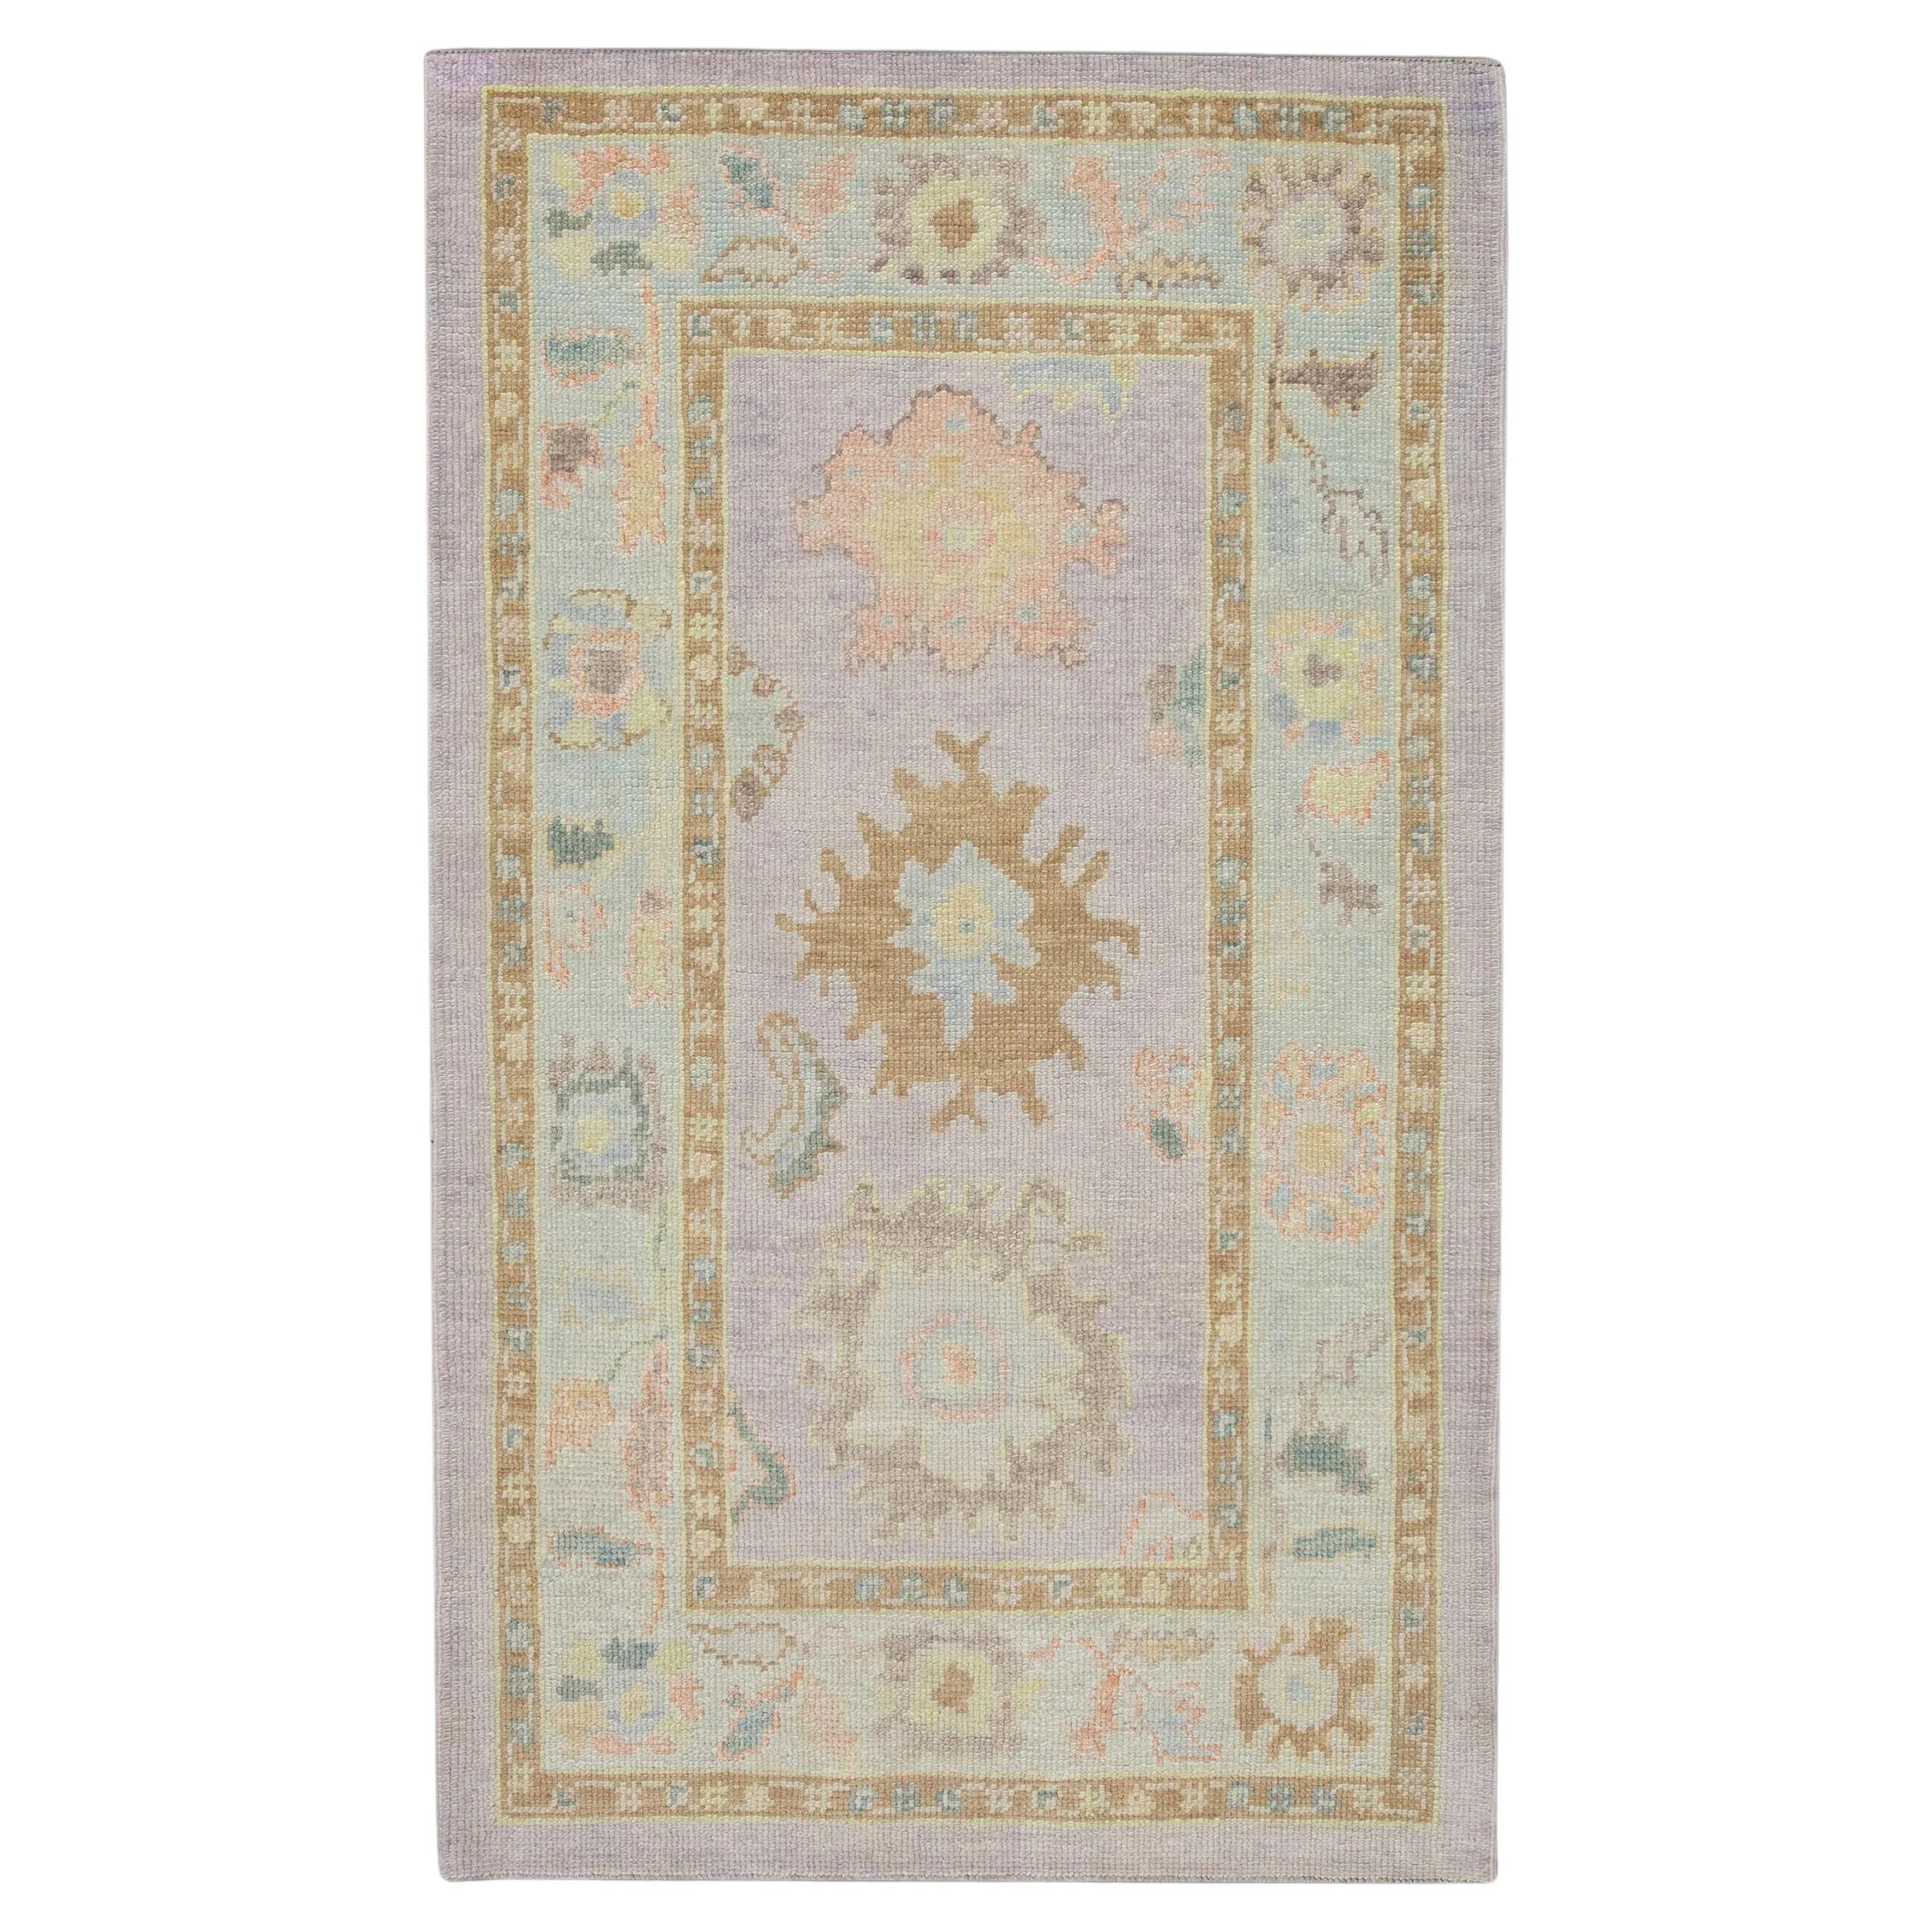 Floral Handwoven Wool Turkish Oushak Rug With Lavender Design 3'2" x 5'4"  For Sale